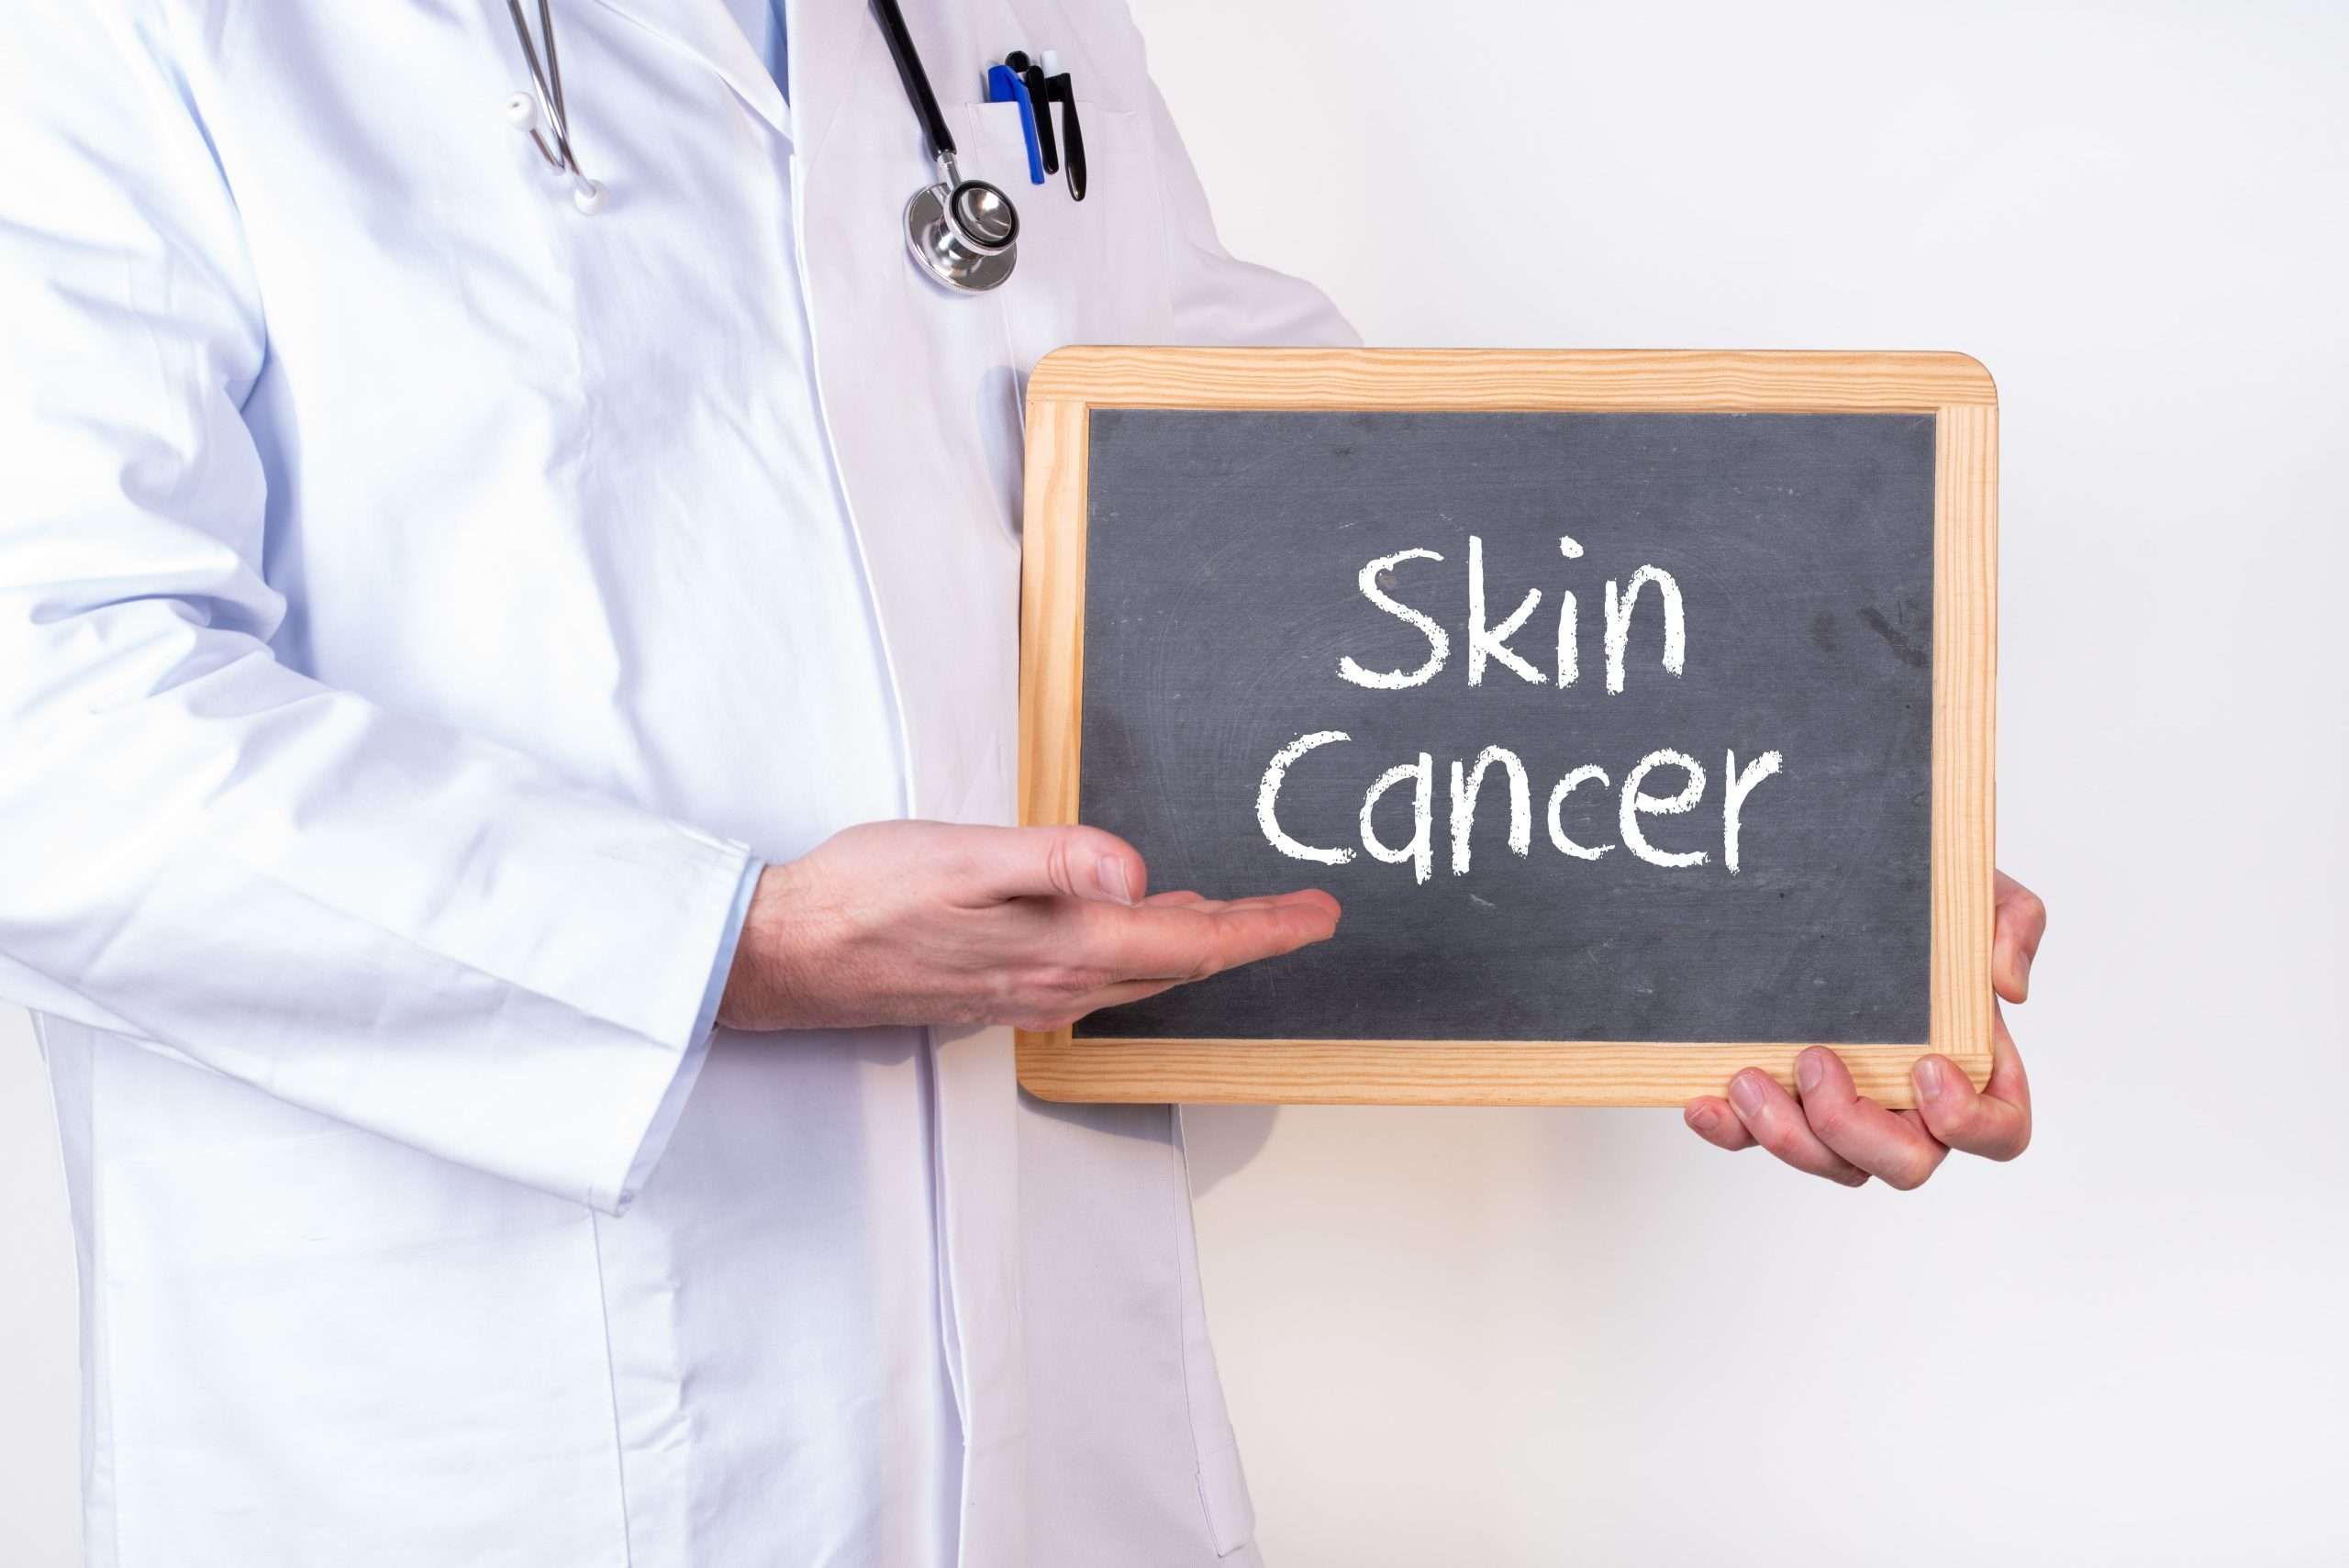 select the most correct statement concerning skin cancer